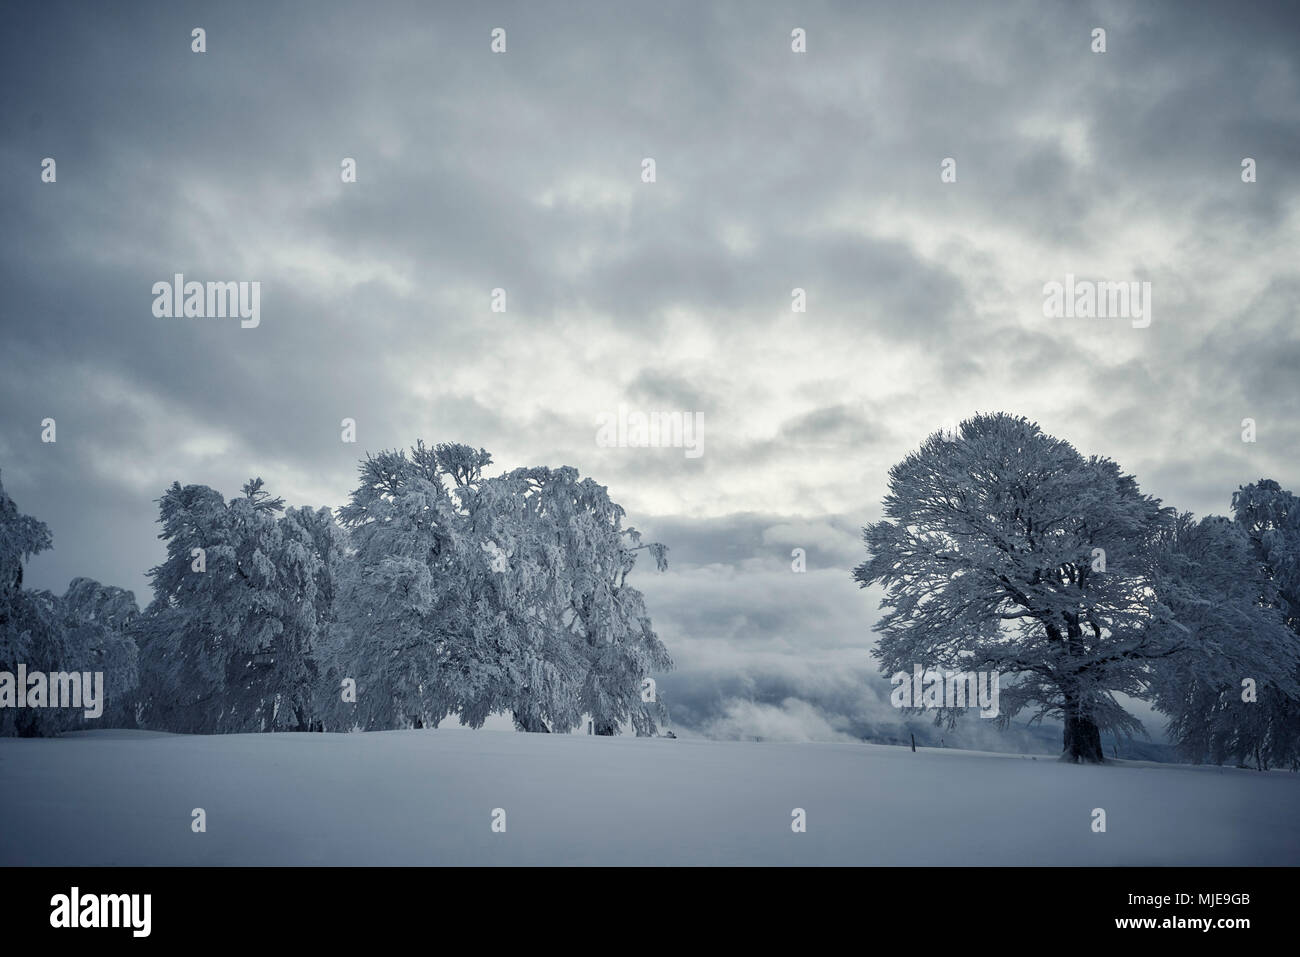 snowy windswept beech on a hill in winter, sky with dark clouds Stock Photo